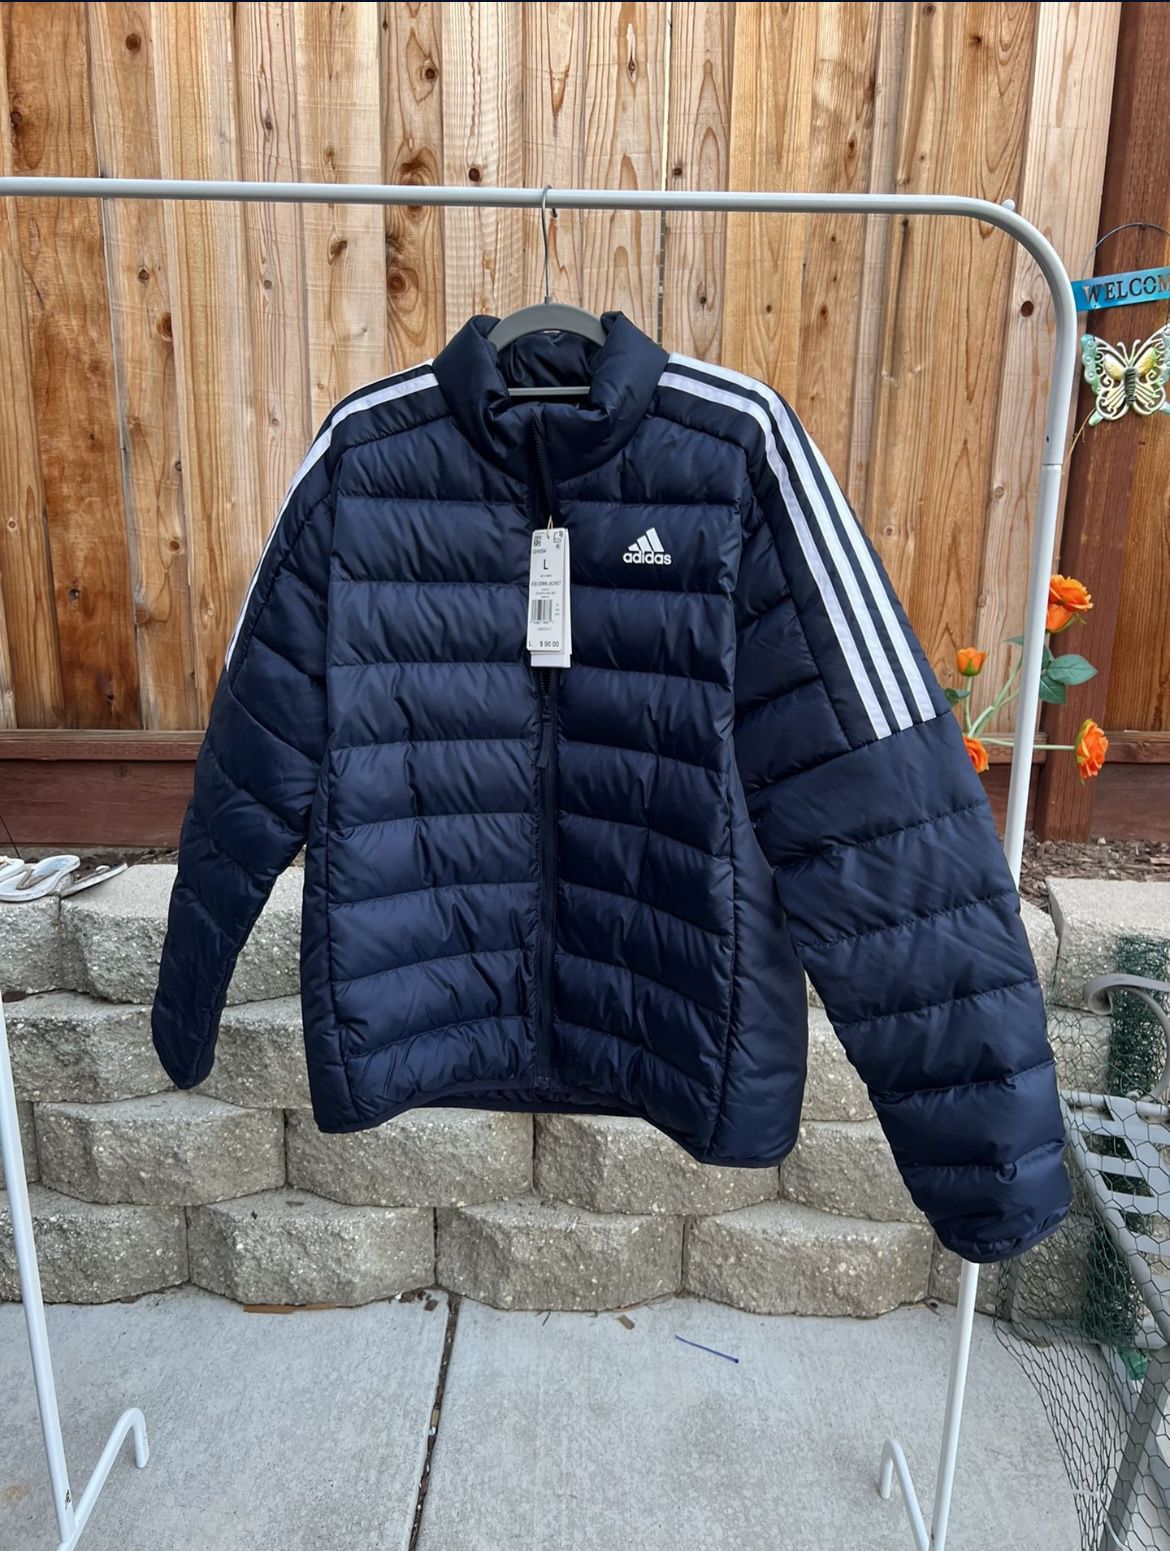 New Mens Adidas Zip Up Puffer Jacket Size Large 